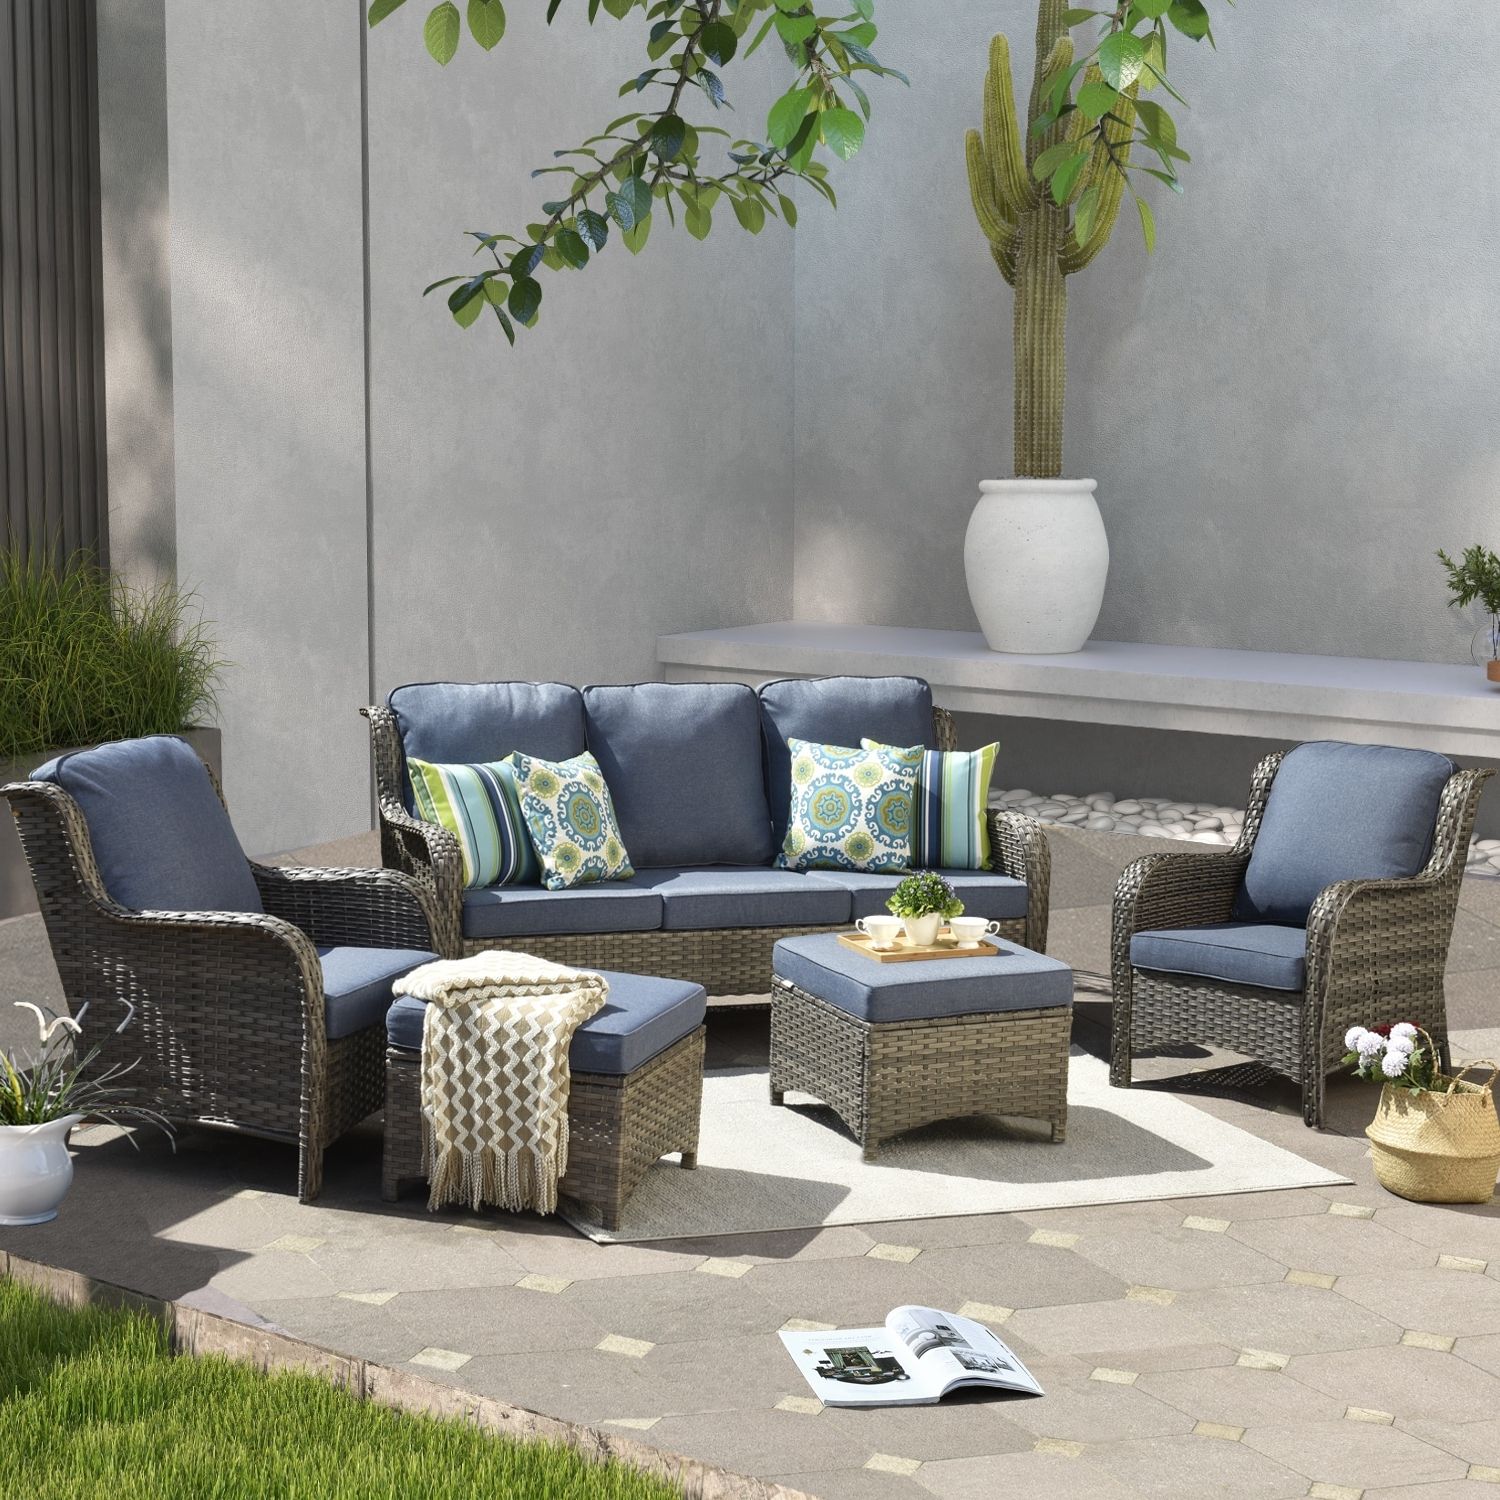 Most Recently Released Ovios 5 Piece Patio Conversation Wicker Furniture Set – On Sale – – 31733697 Intended For 5 Piece Outdoor Patio Furniture Set (View 7 of 15)